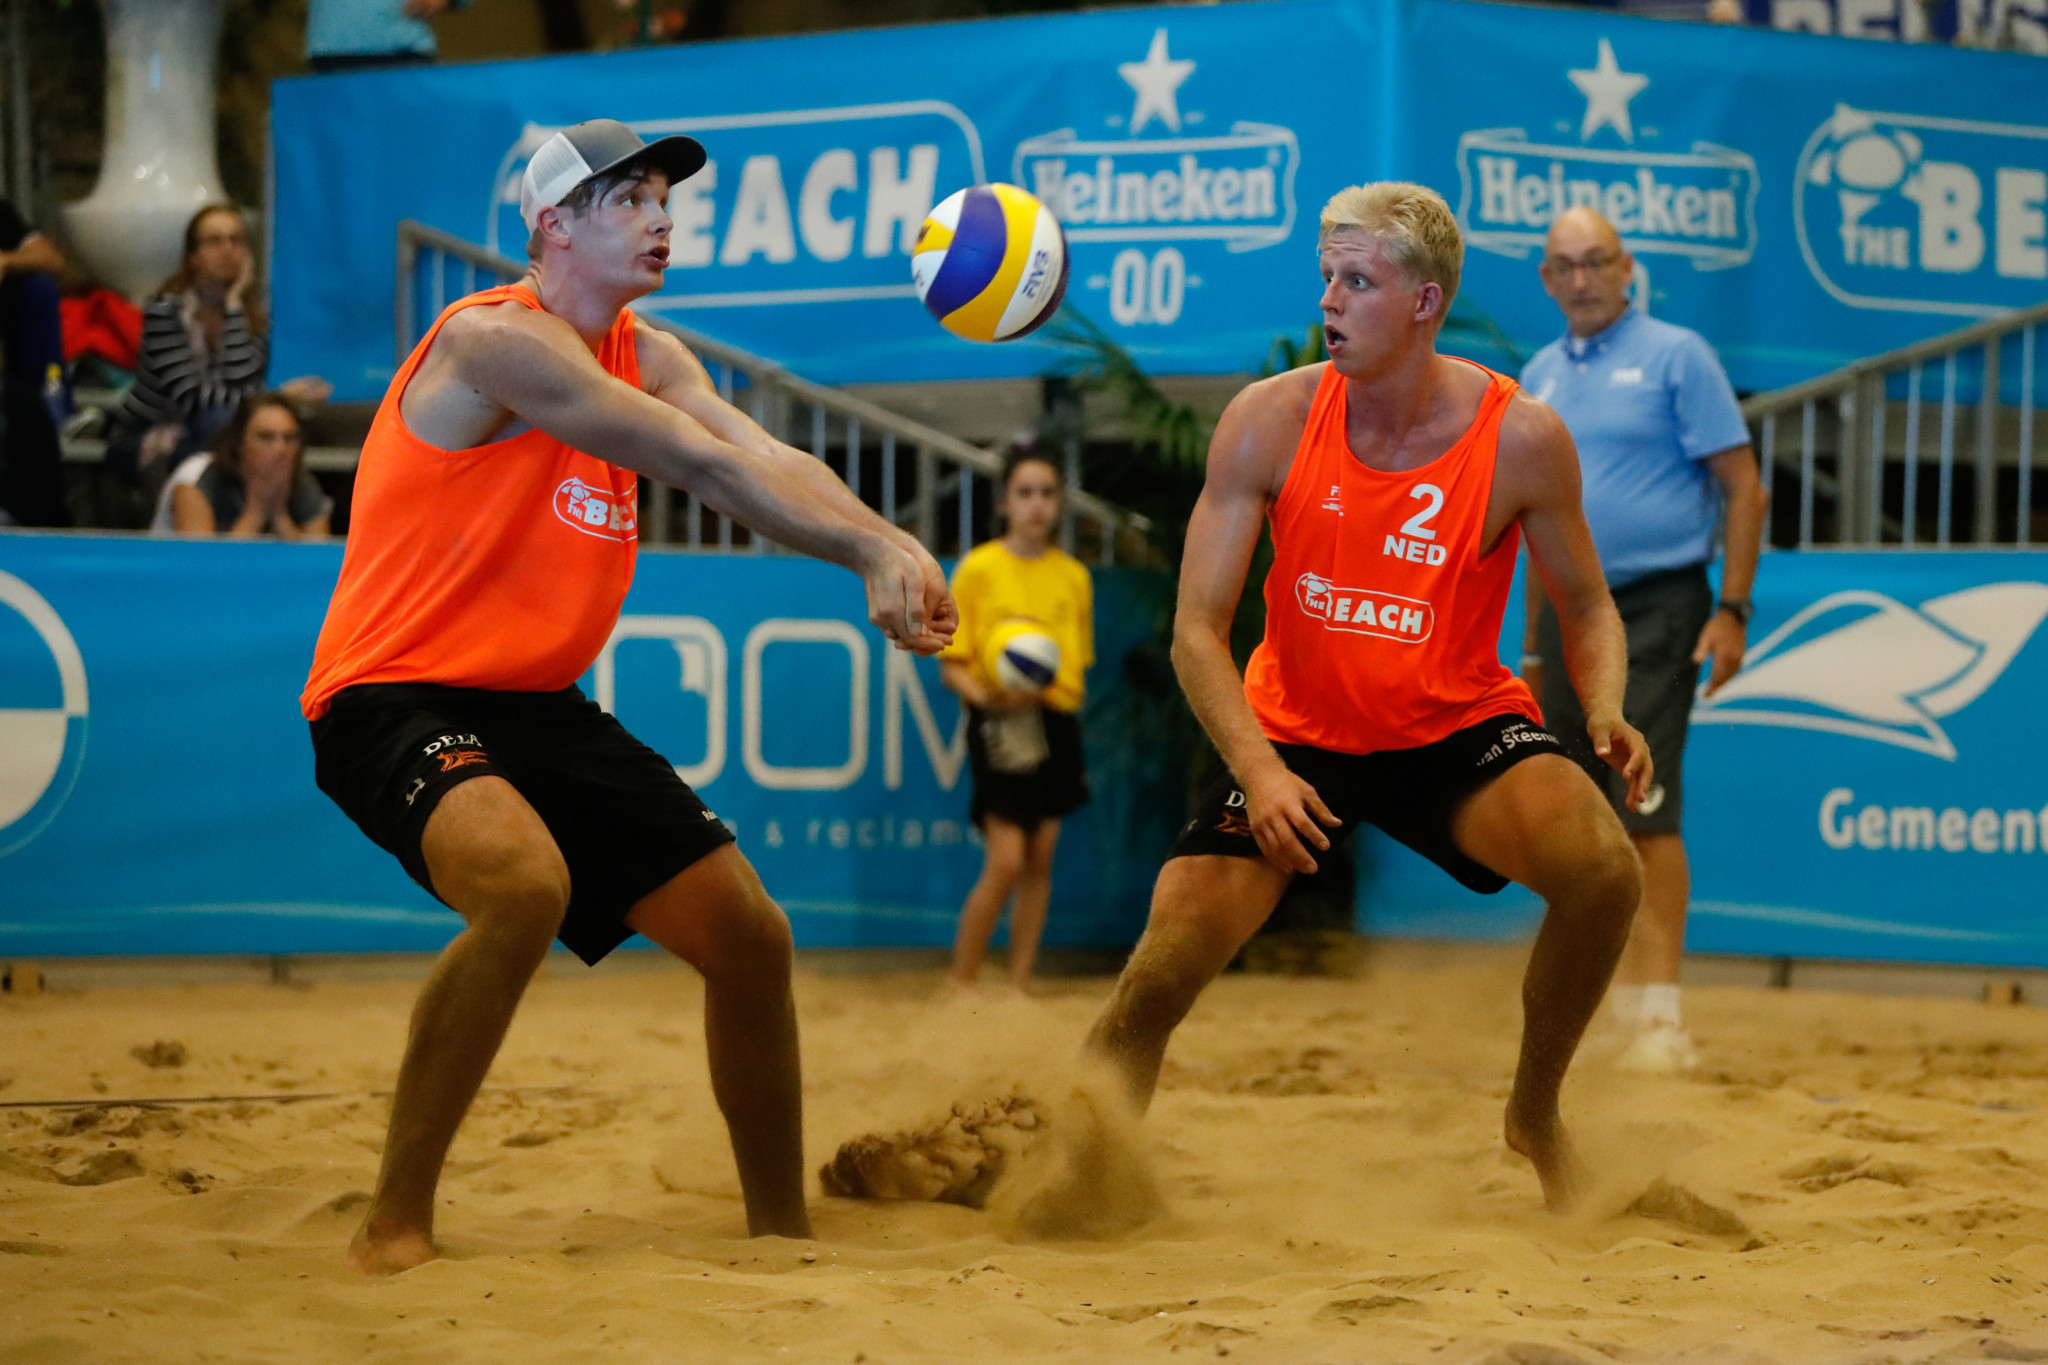 Ruben Penninga, left, and Tom van Steenis, right, were one of three Dutch pairings to suffer elimination from the men's competition at the FIVB Beach World Tour Aalsmeer Open today ©FIVB